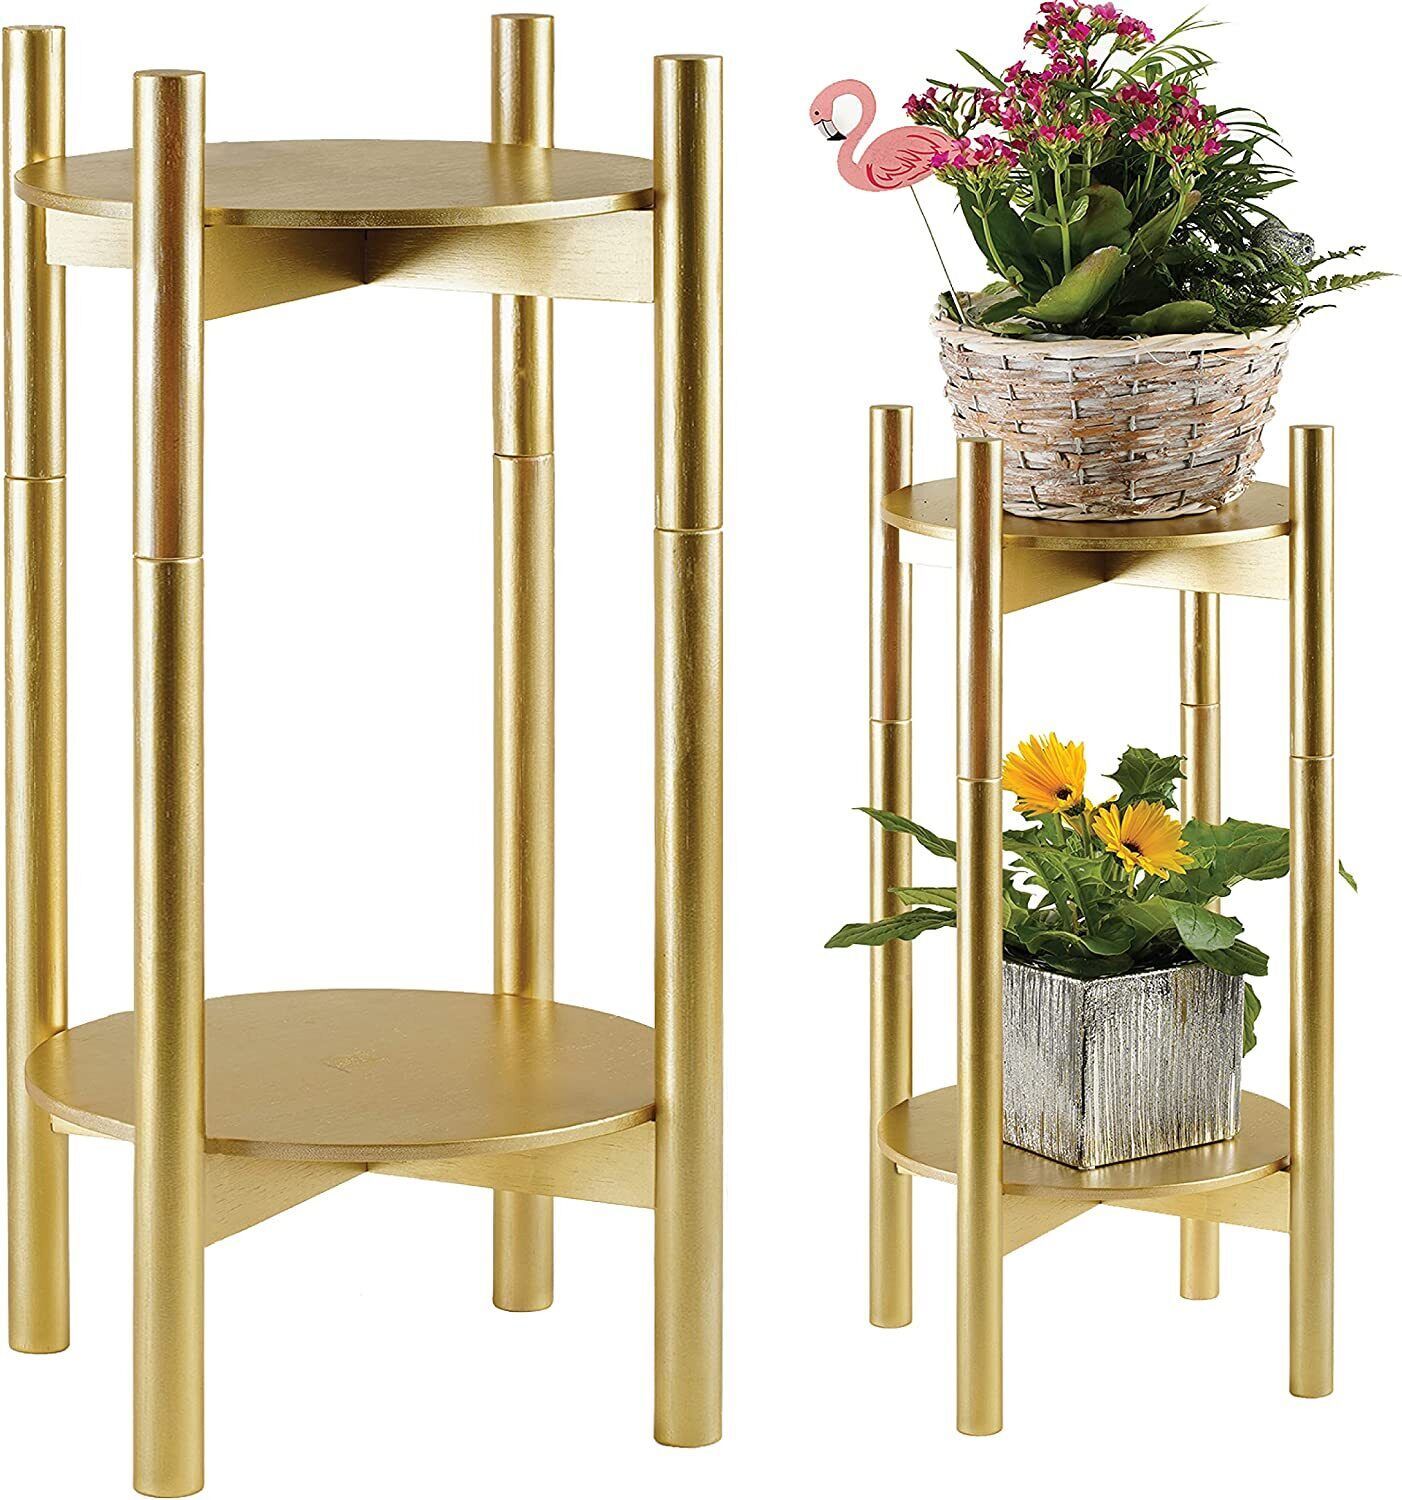 Golden Indoor Plant Stand For 5 To 10 Inch Diameter Planter Pots 24 Inches  High | Ebay Within 5 Inch Plant Stands (View 6 of 15)